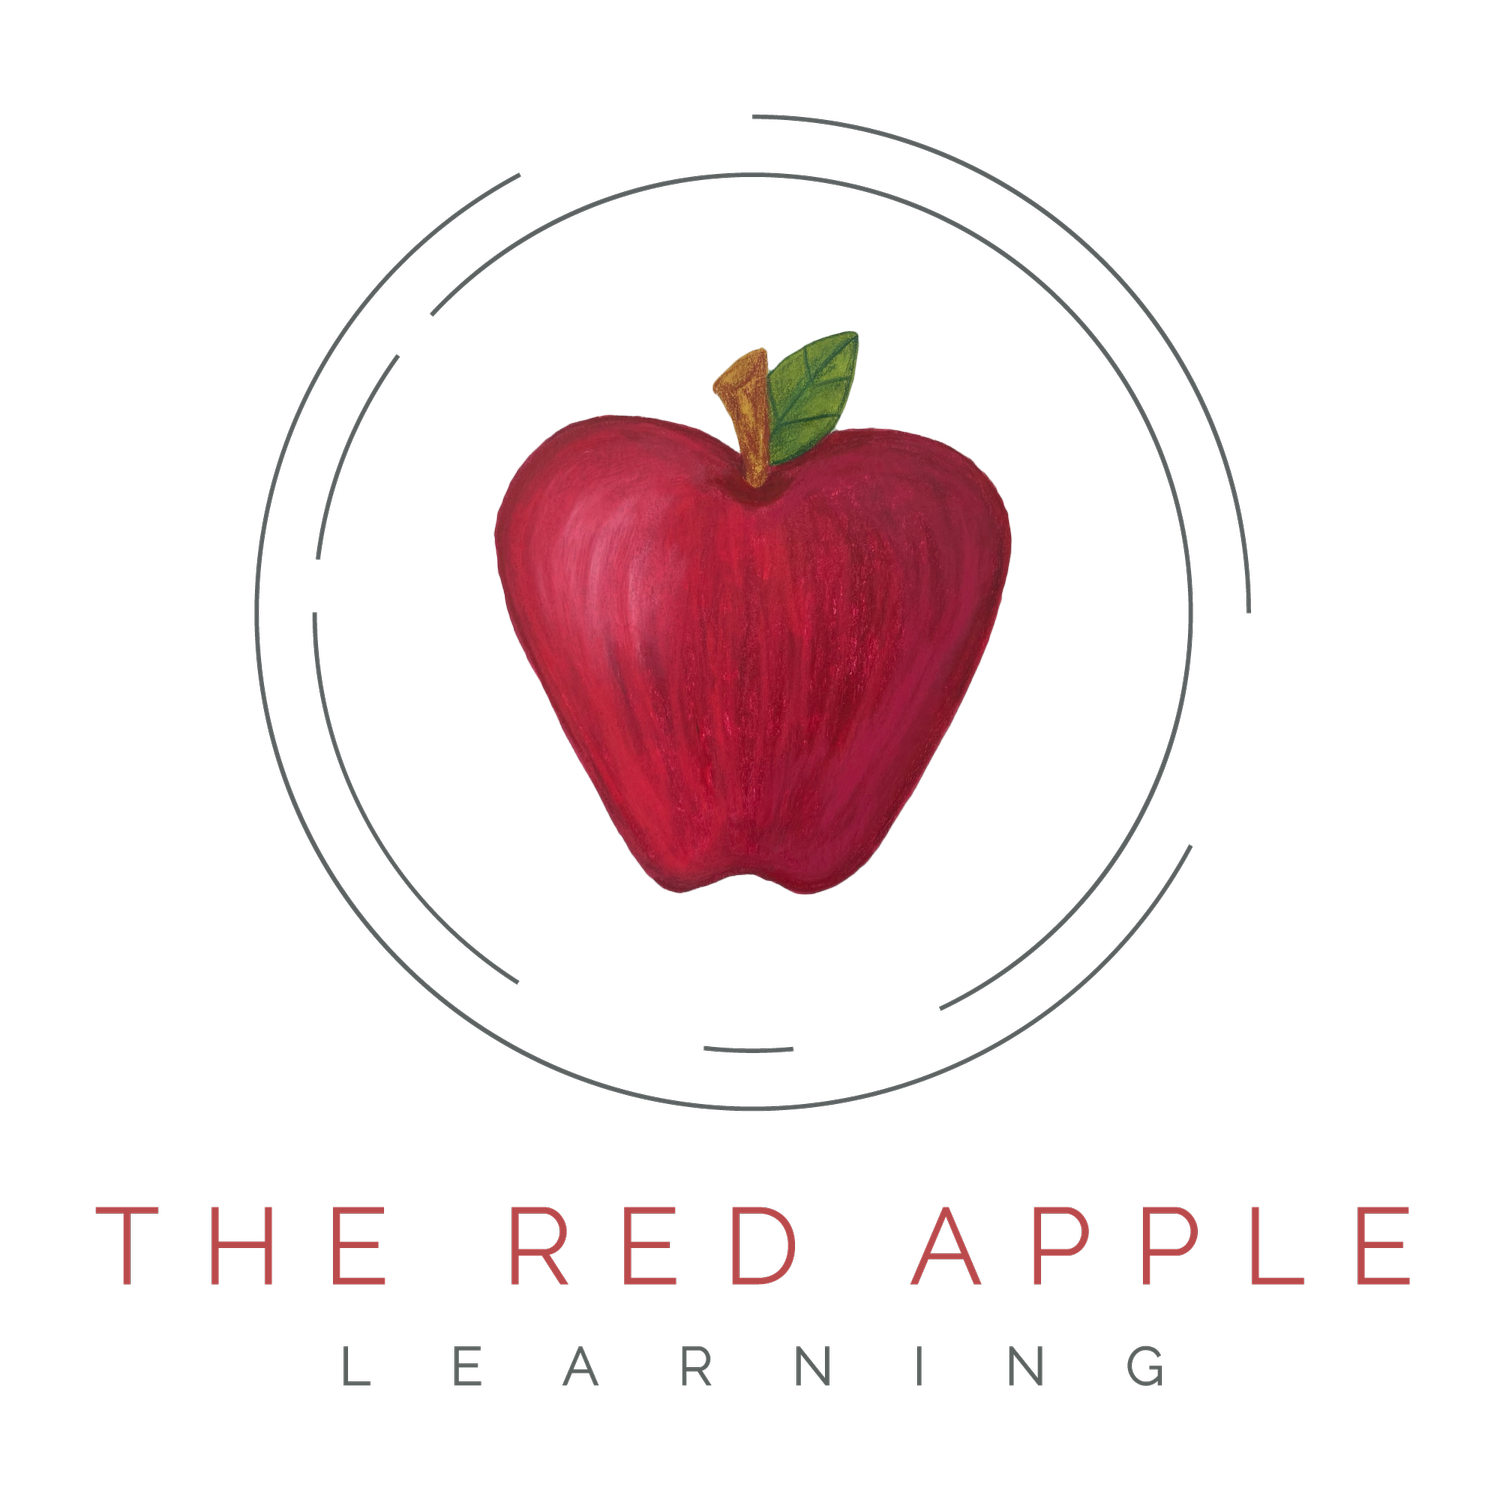 The Red Apple Learning